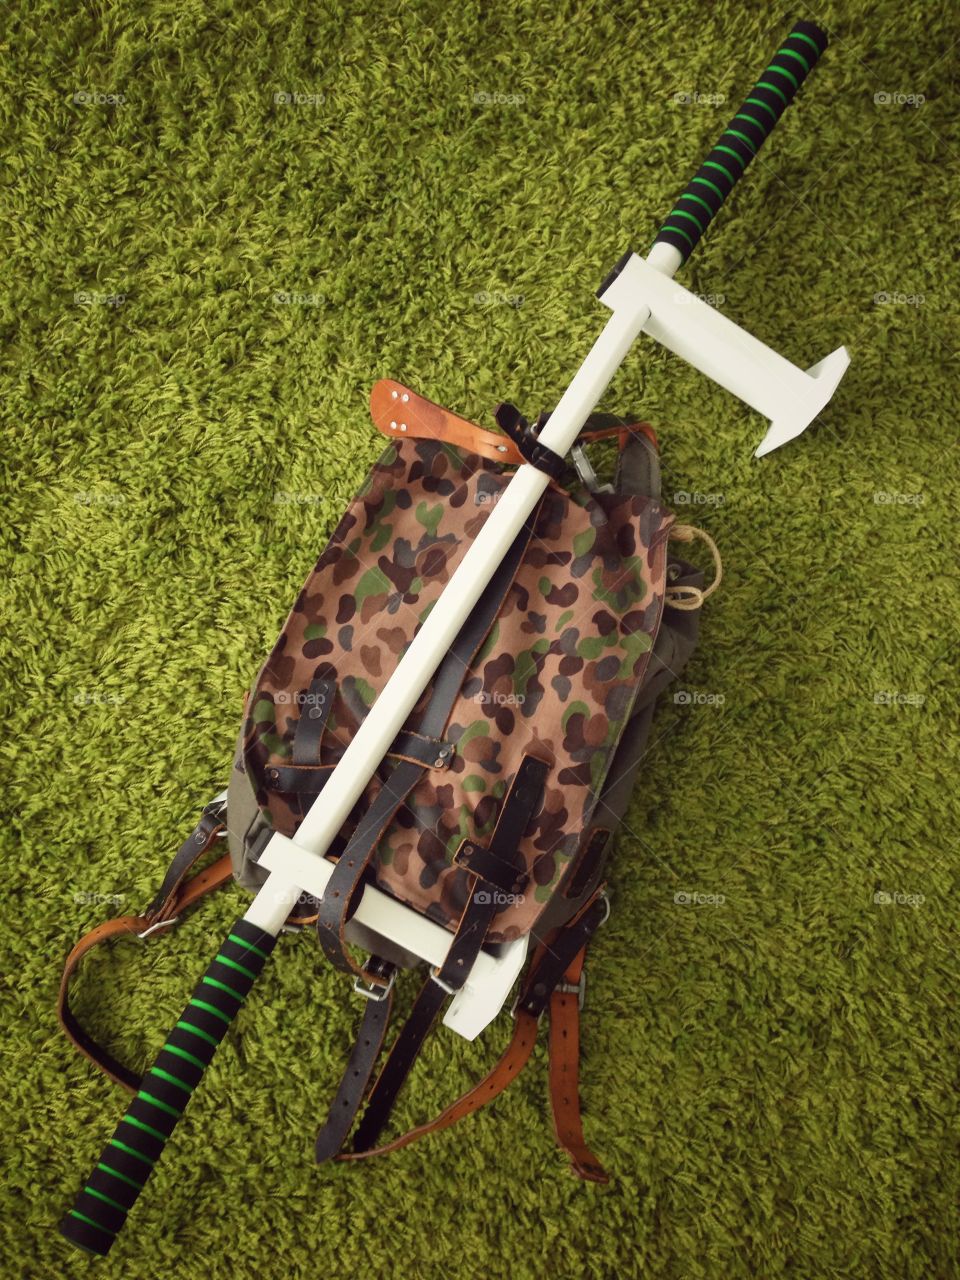 Austrian army backpack with a training horizontal bar on a green carpet